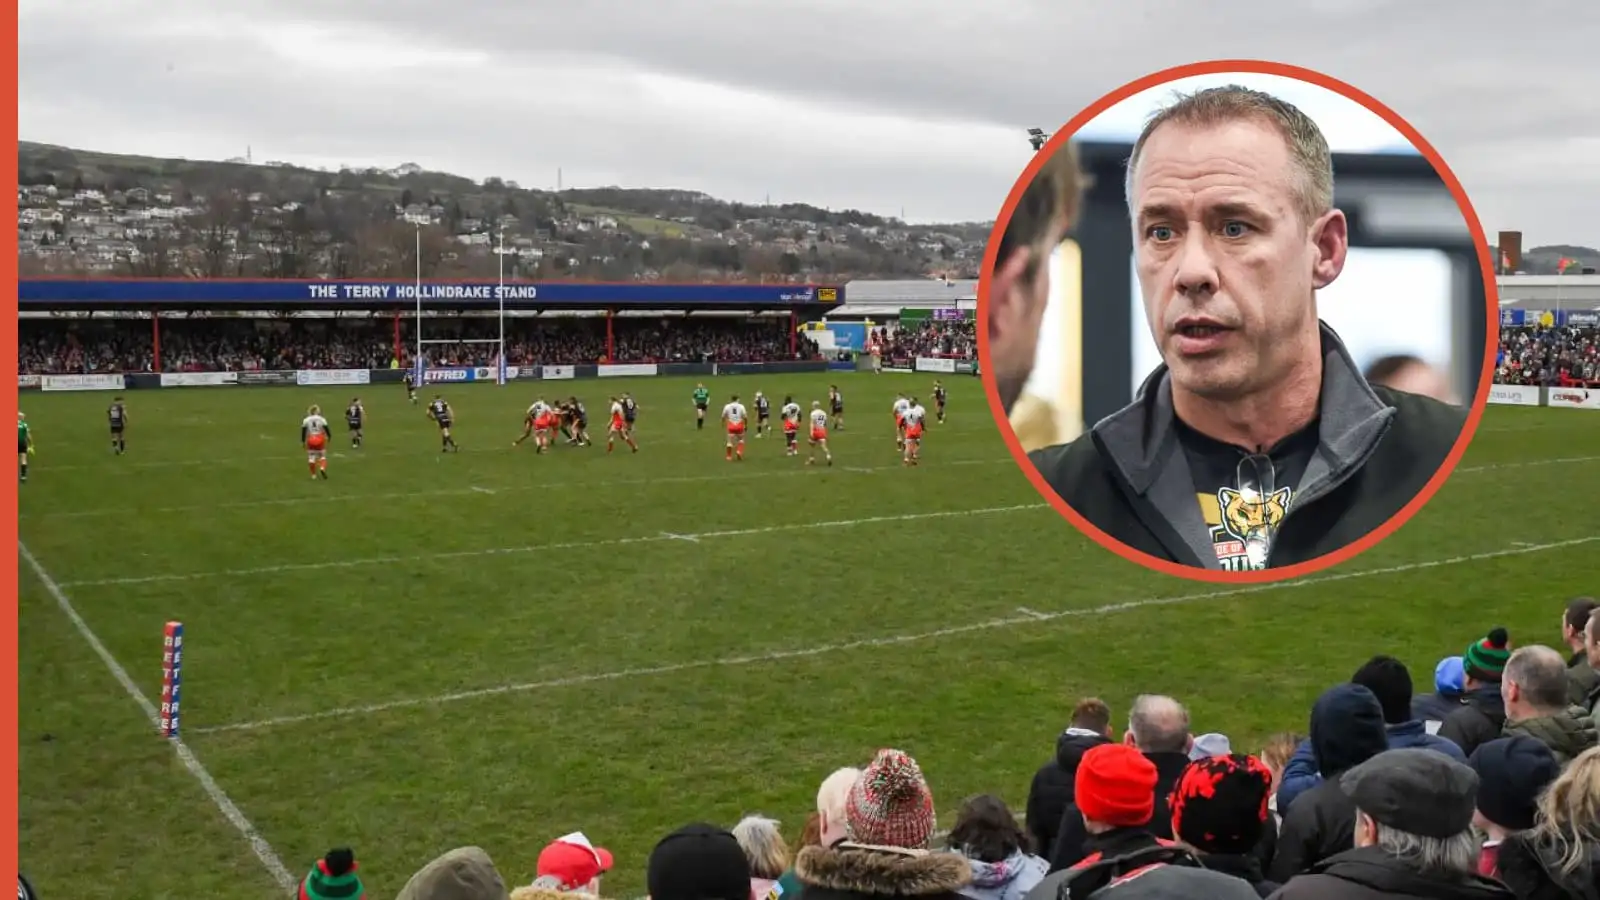 Keighley Cougars allege sacked coach refused player signings in extraordinary statement